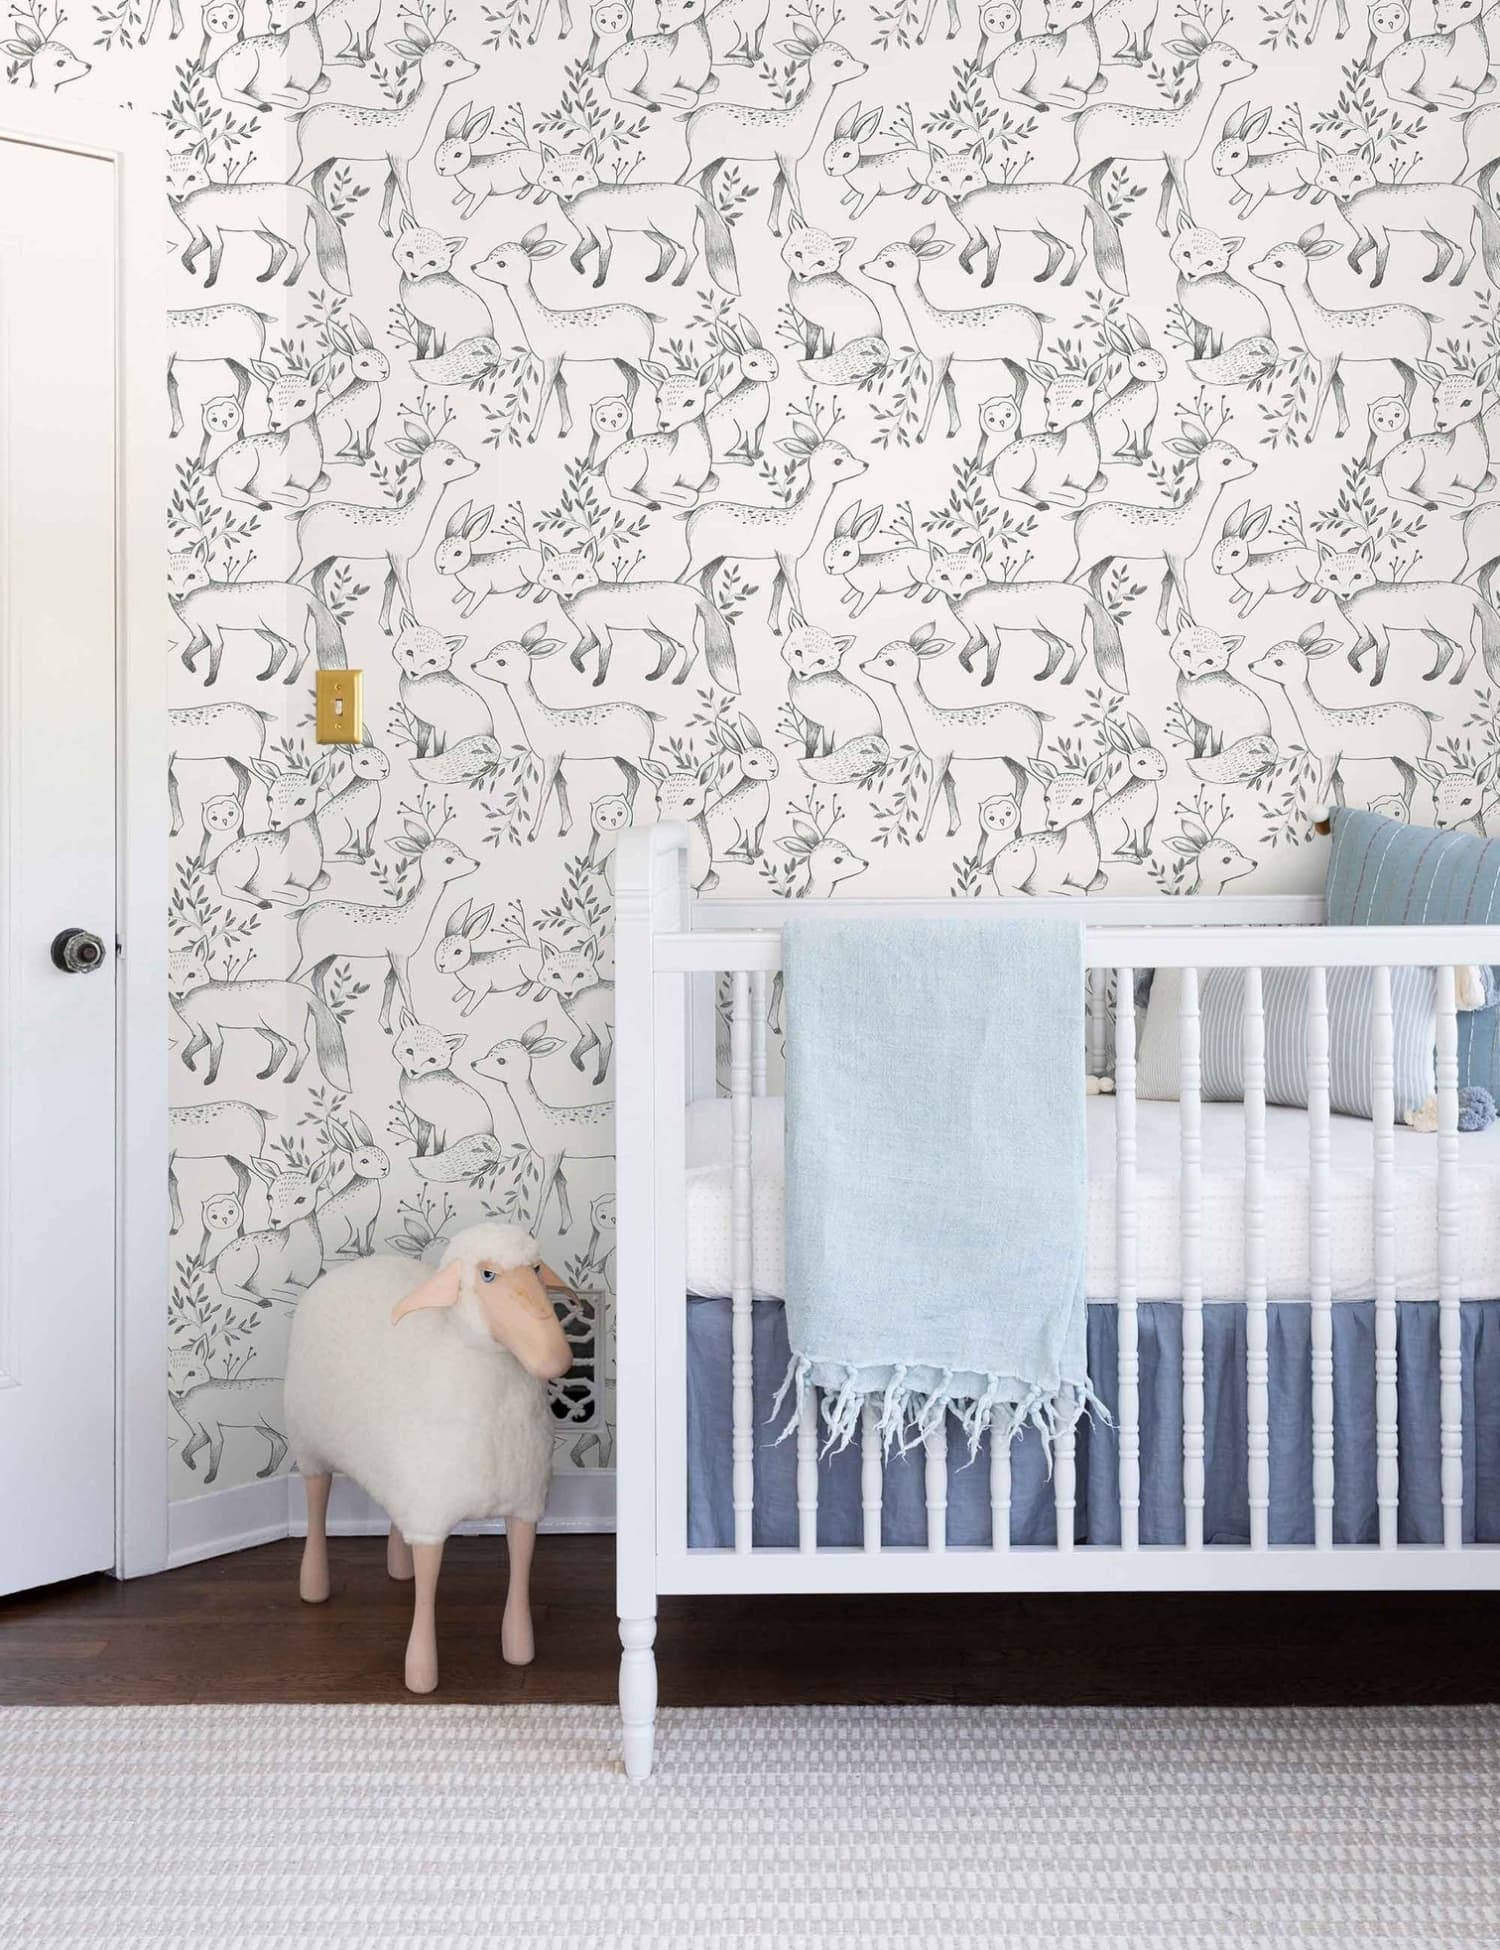 12 Animal-Themed Wallpapers That Will Make Your Child’s Space Come Alive